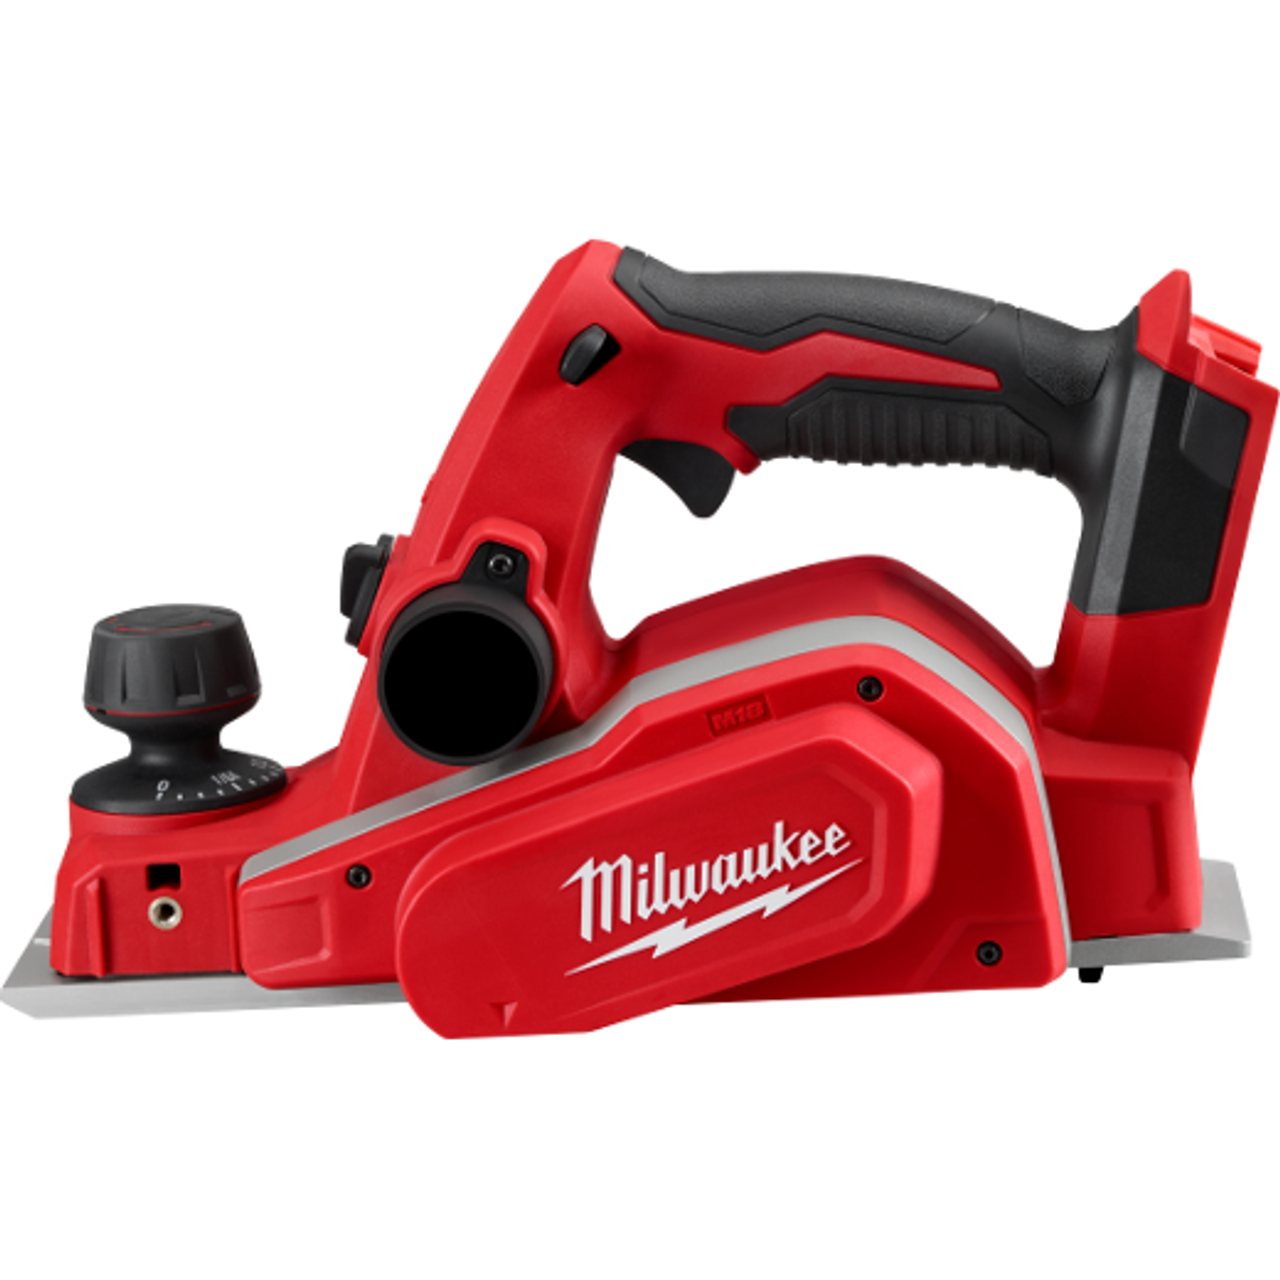 Milwaukee I M18™ 3-1/4" PLANER - TOOL ONLY | Industrial Maintenance Supply